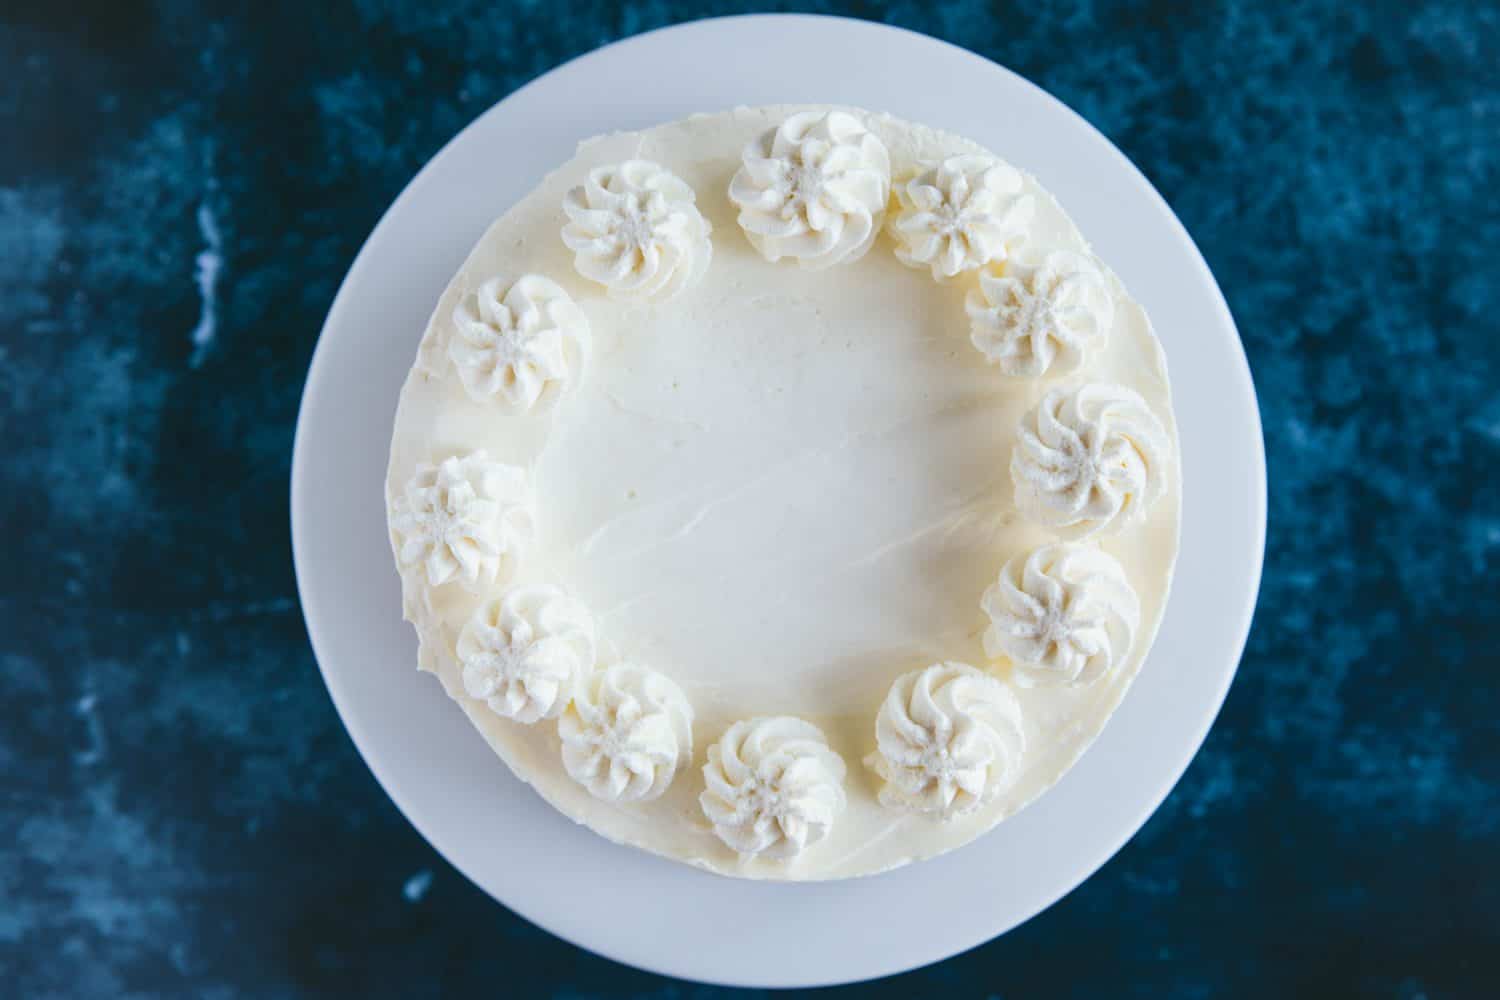 A cheesecake with swirls of piped cream on top. 